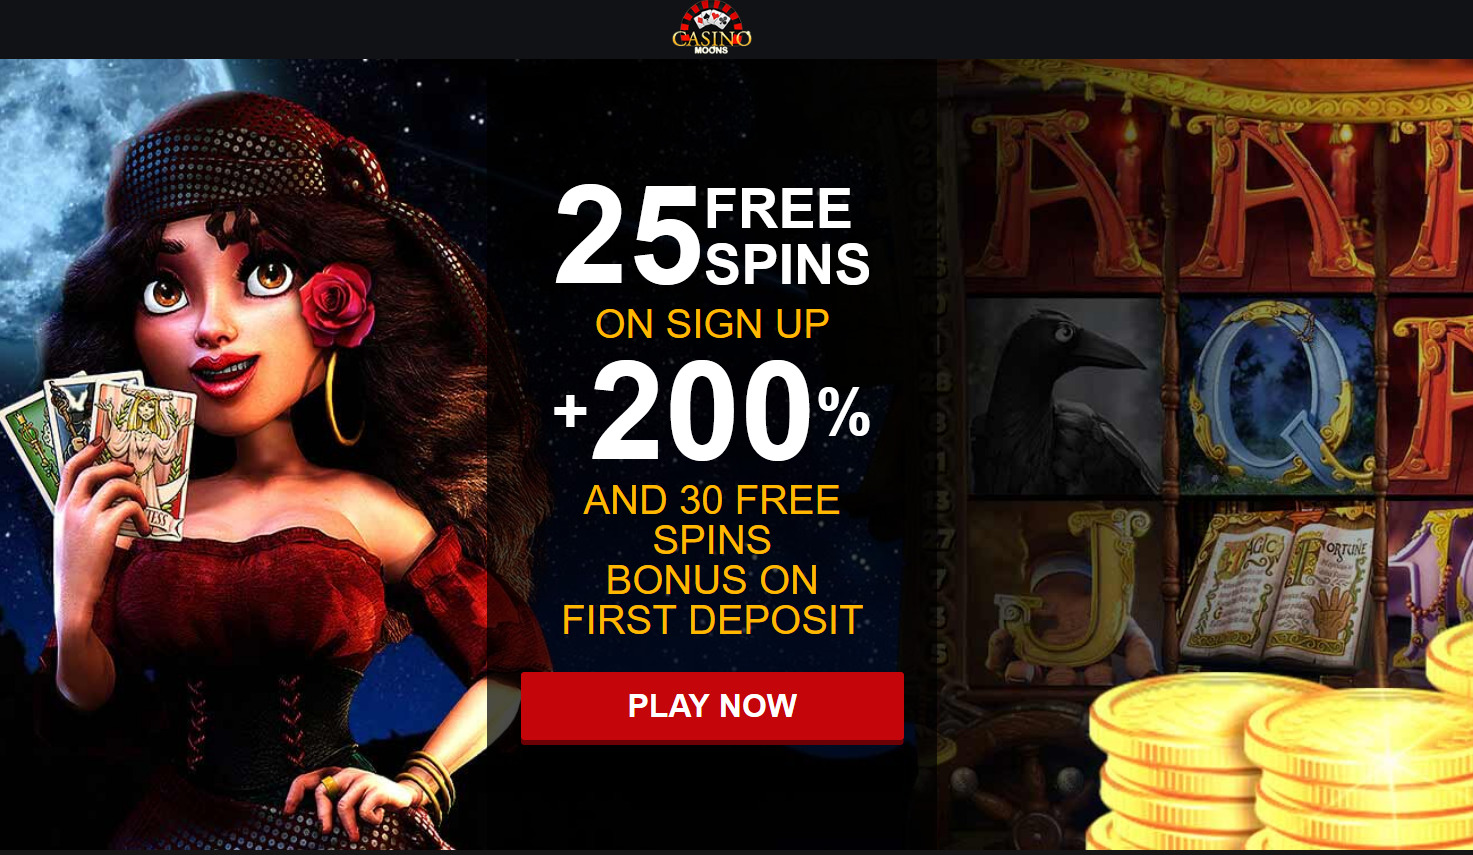 25 FREE SPINS ON SIGN UP + 200% AND 30 FREE
                                                          SPINS BONUS ON
                                                          FIRST DEPOSIT